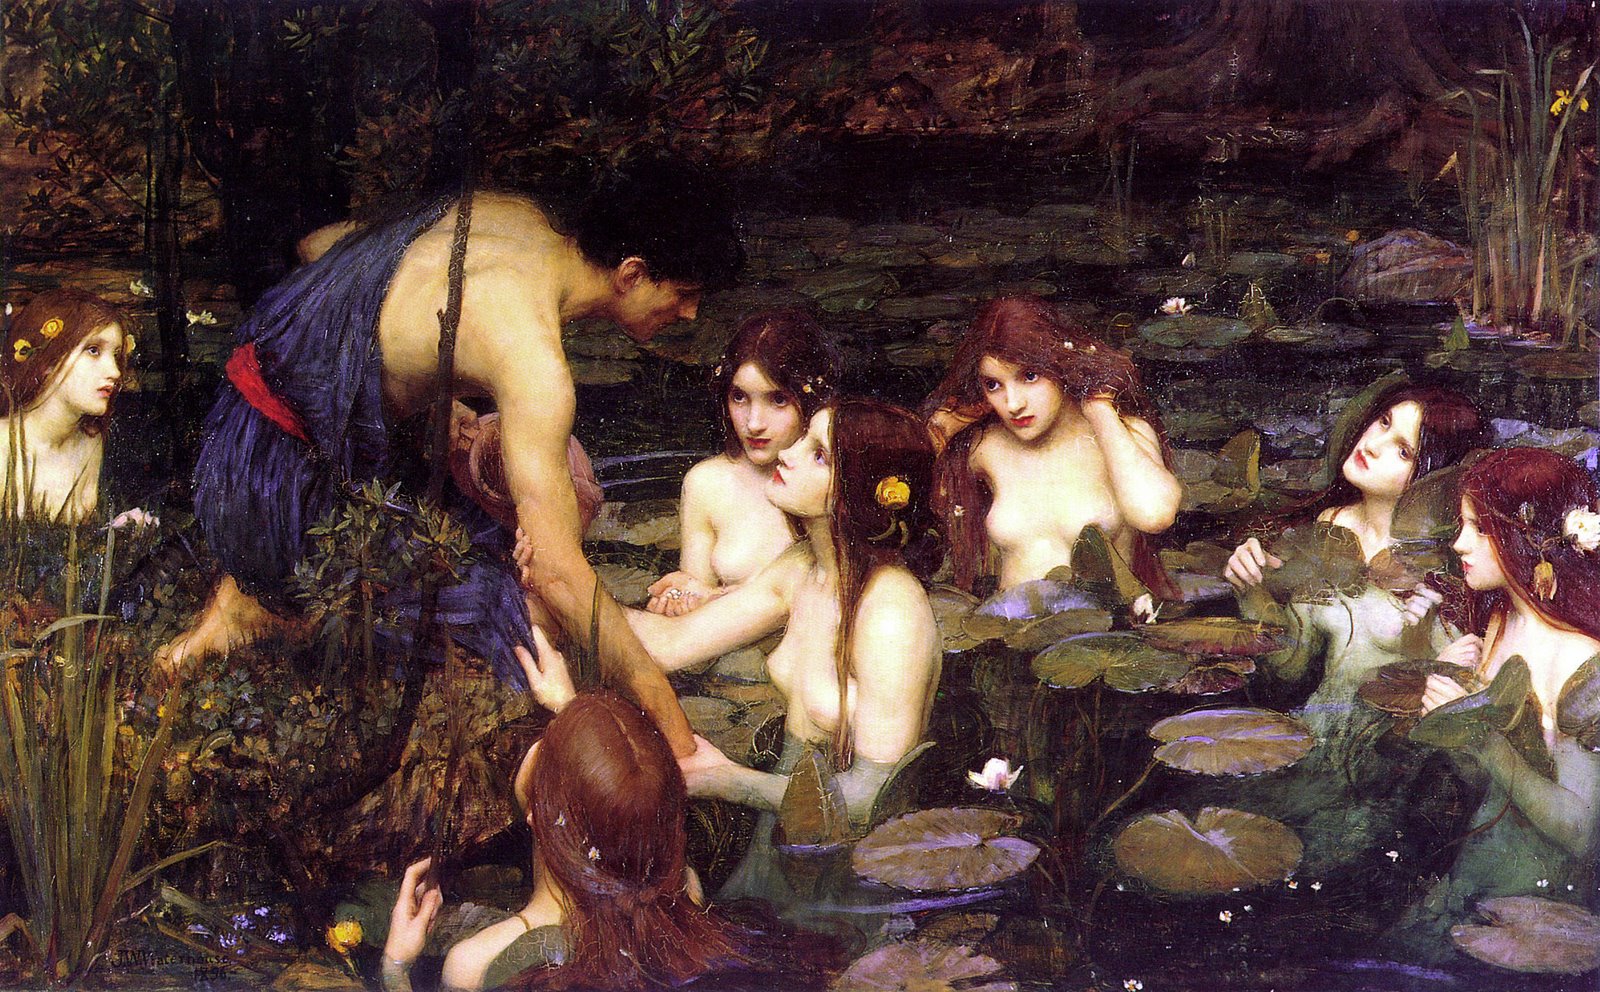 'Hylas and the Nymphs' by John William Waterhouse 